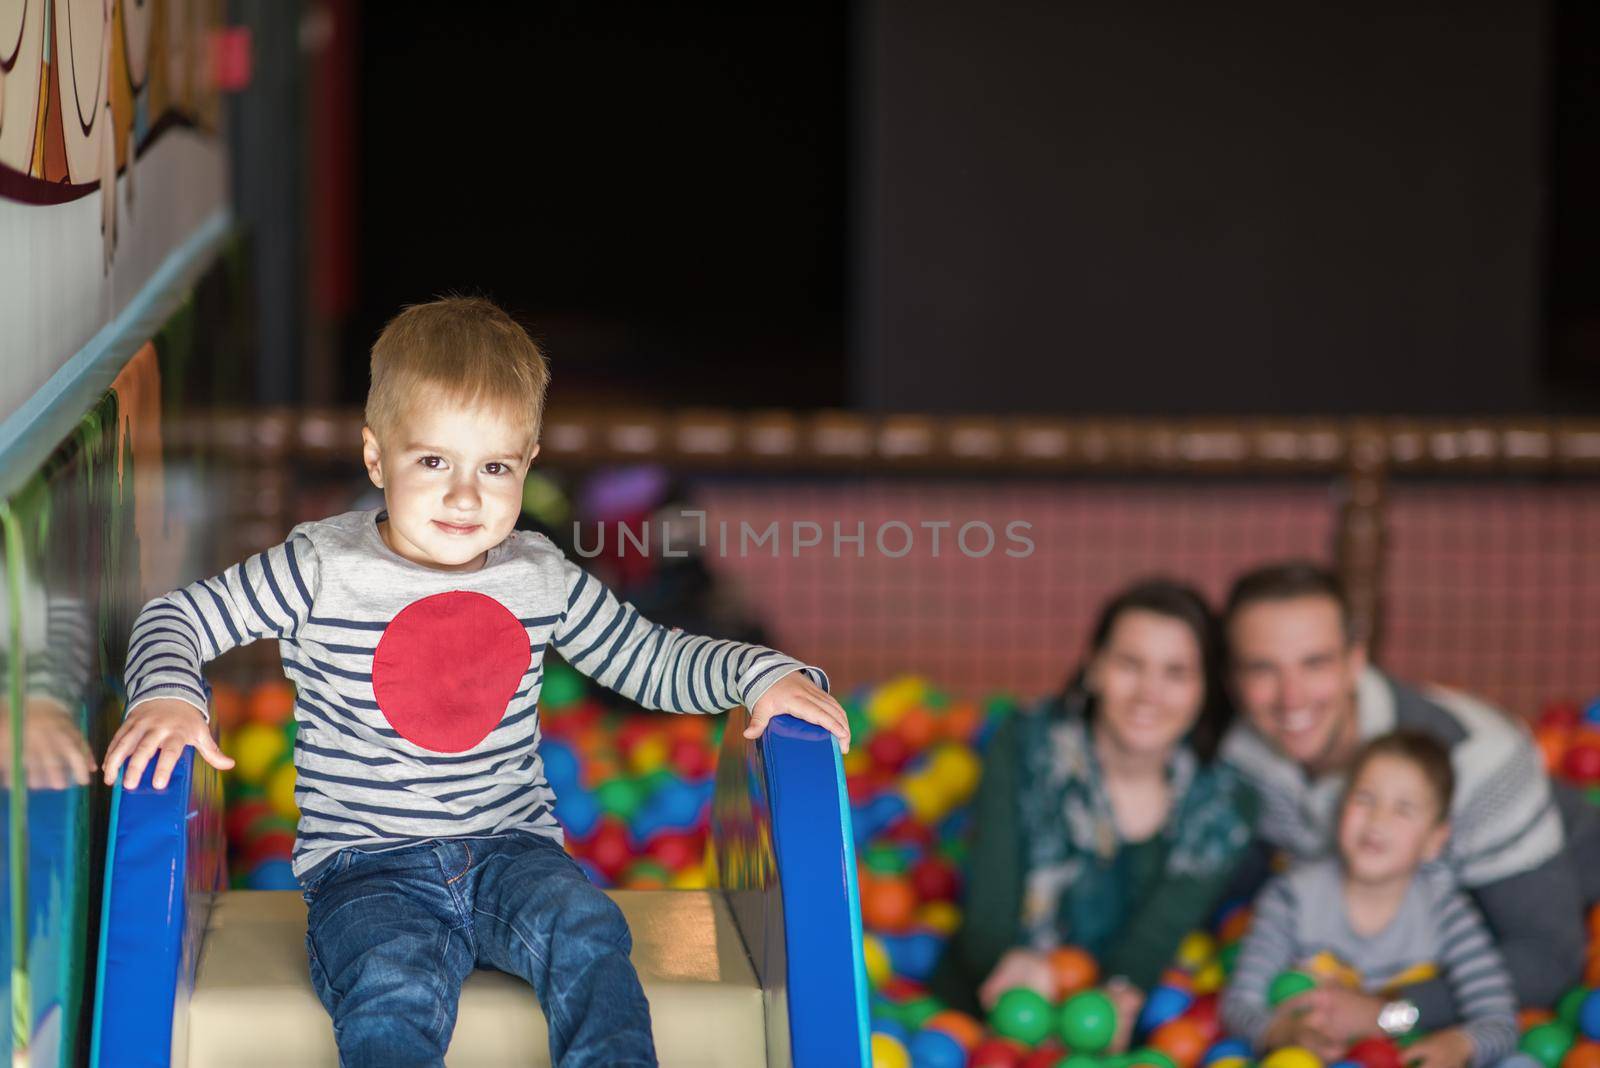 happy family enjoying free time young parents and kids playing in the pool with colorful balls at childrens playroom